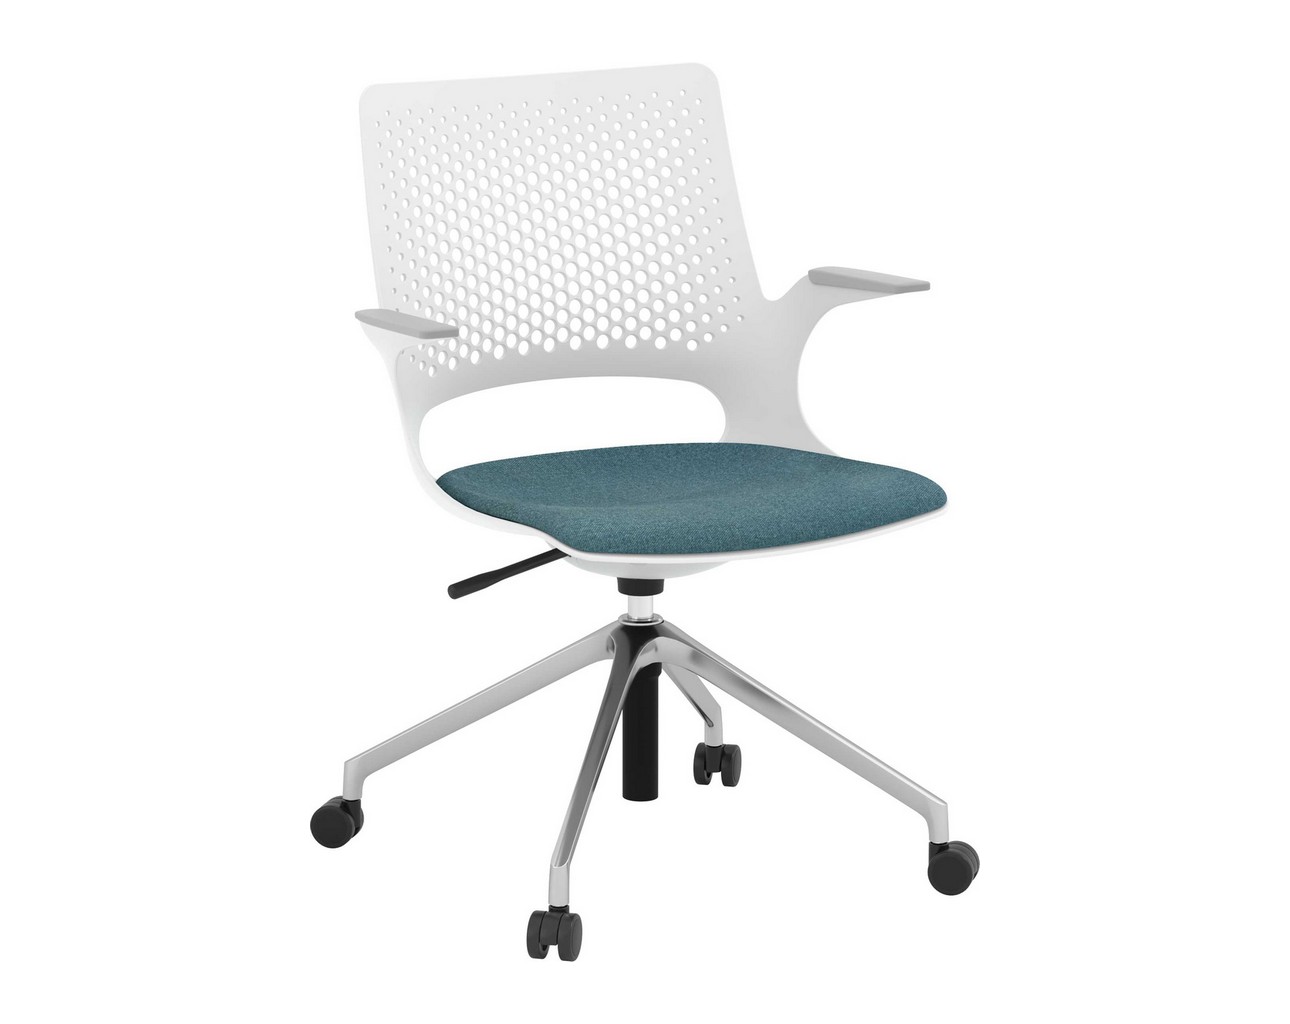 Harmony Multi-Purpose Chair - Polished Aluminum Base and Light Grey Frame with Teal Seat